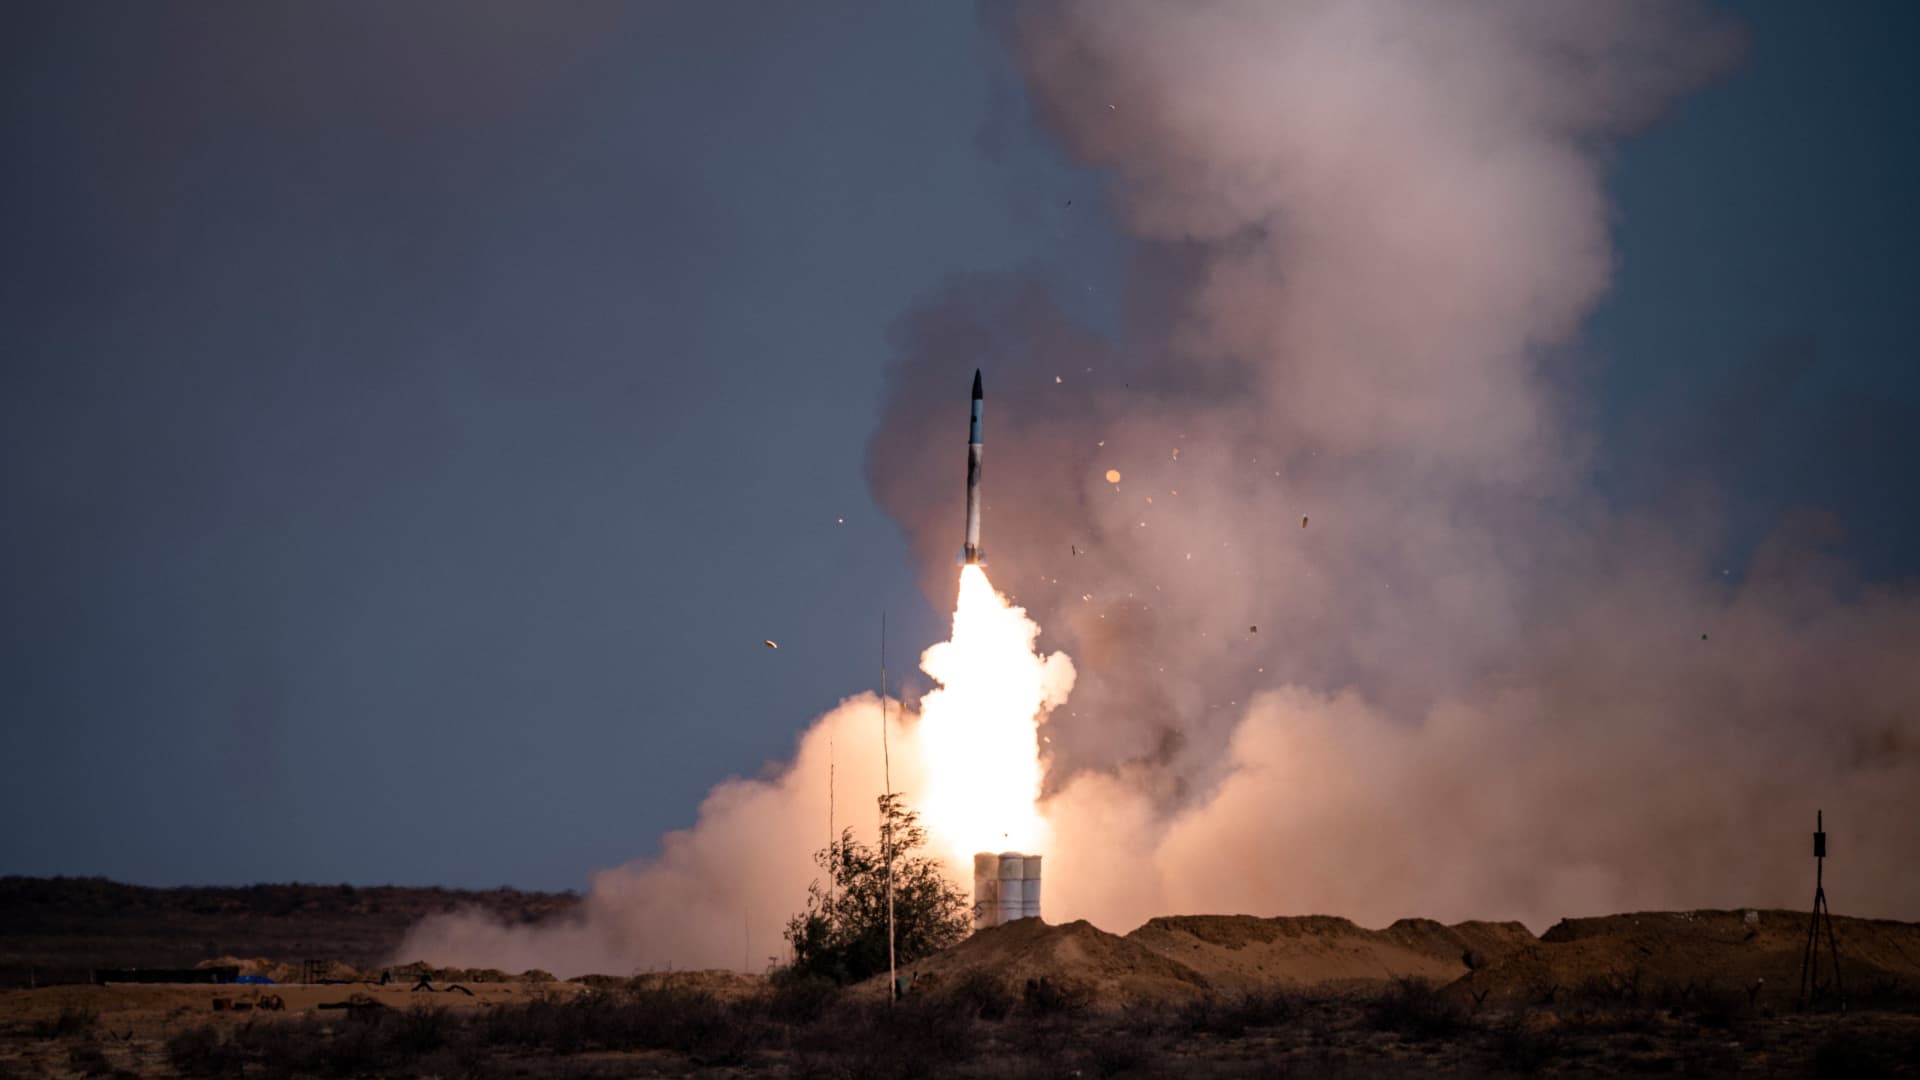 A rocket launches from a S-400 missile system at the Ashuluk military base in Southern Russia on September 22, 2020.